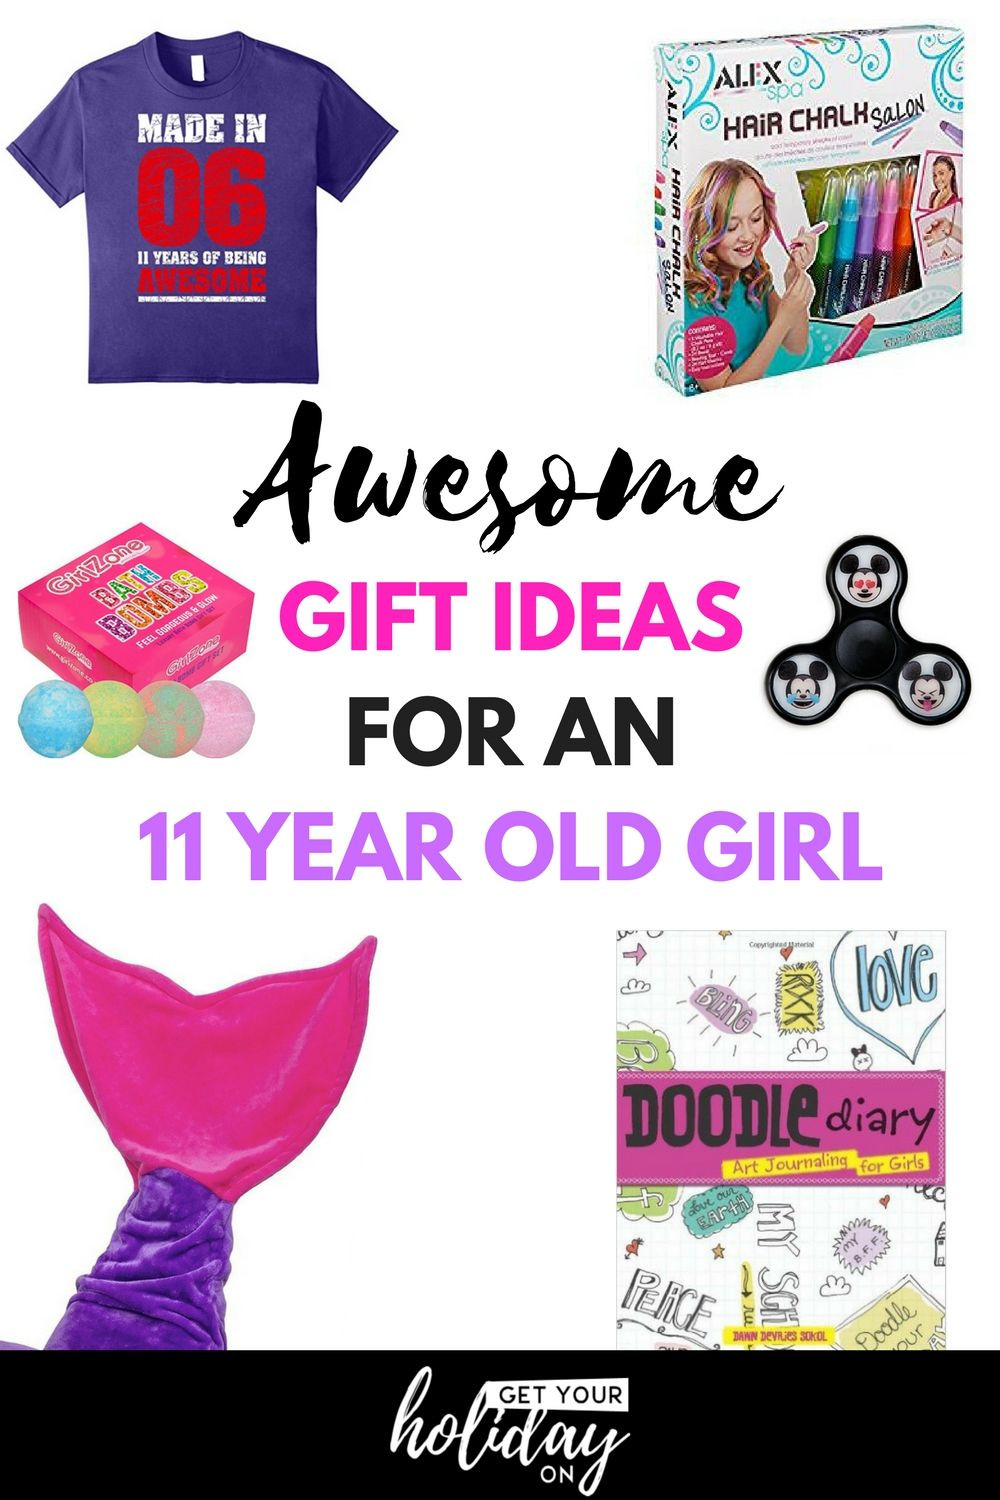 11 Year Old Birthday Gift Ideas
 Awesome Gift Ideas For An 11 Year Old Girl